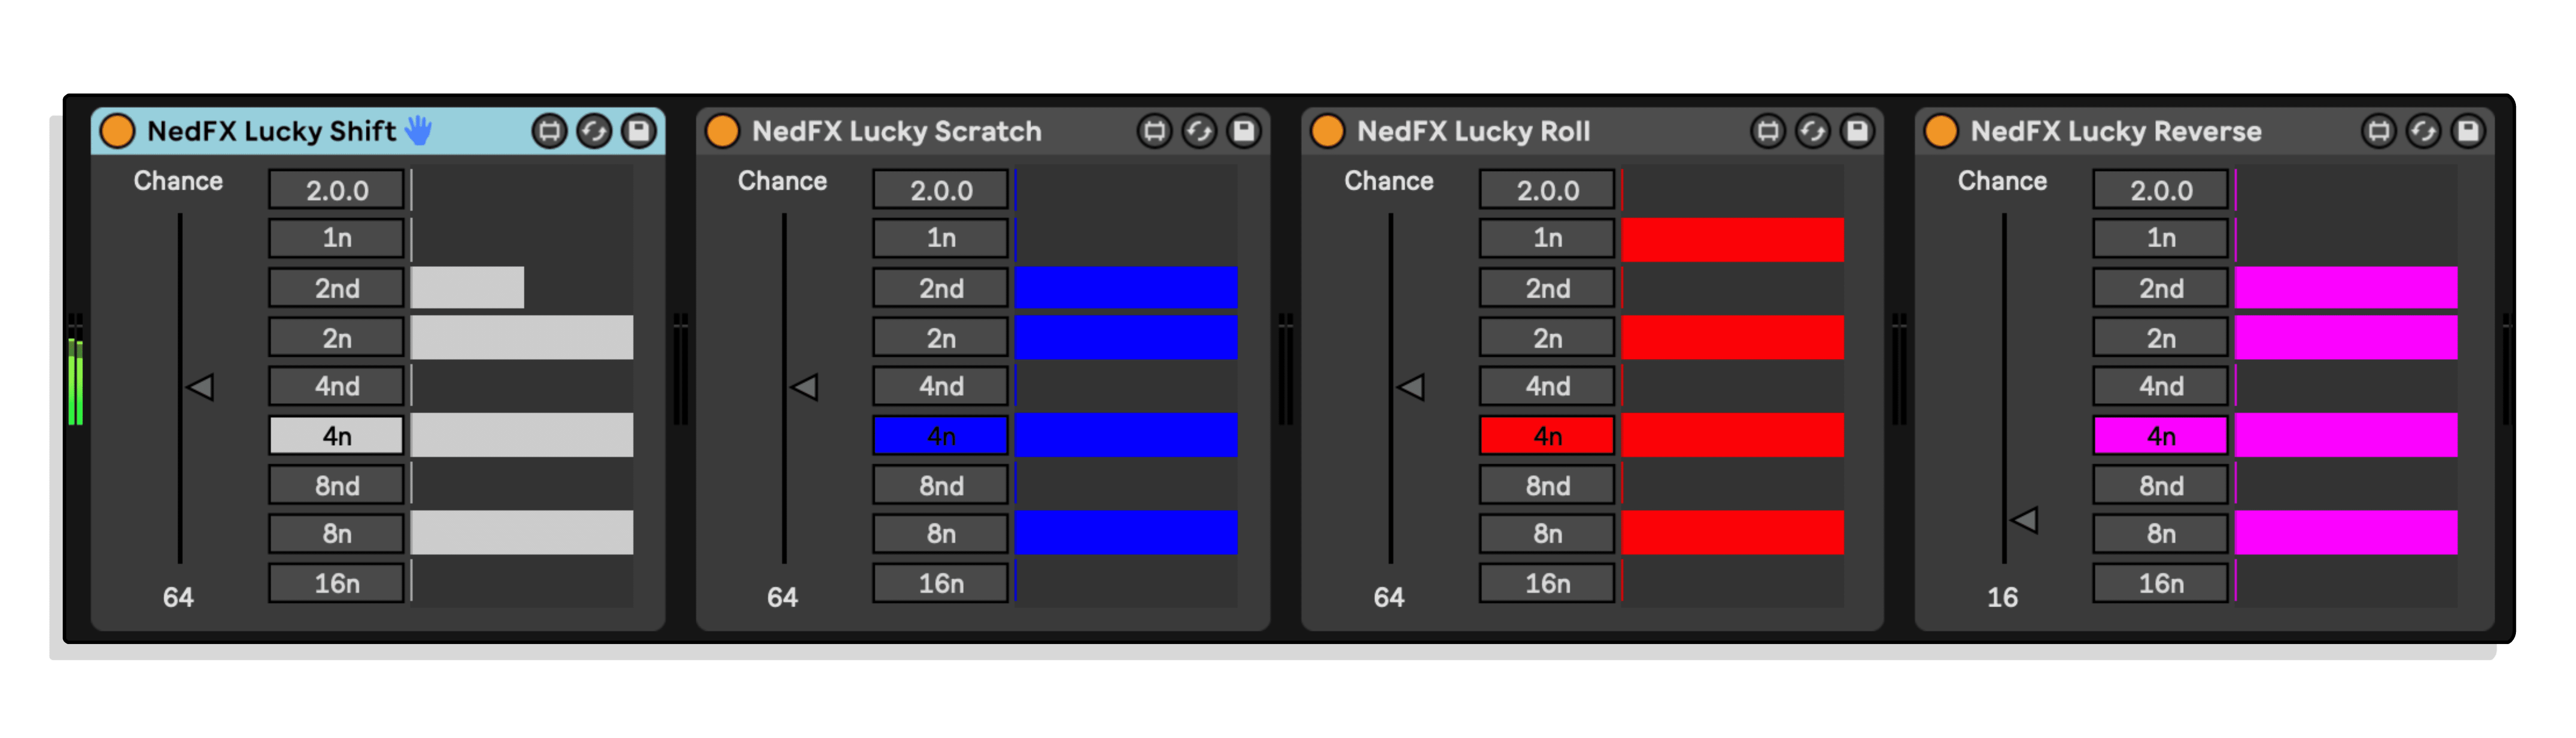 NED RUSH LUCKY 16 MAXFORLIVE DEVICES FOR ABLETON LIVE